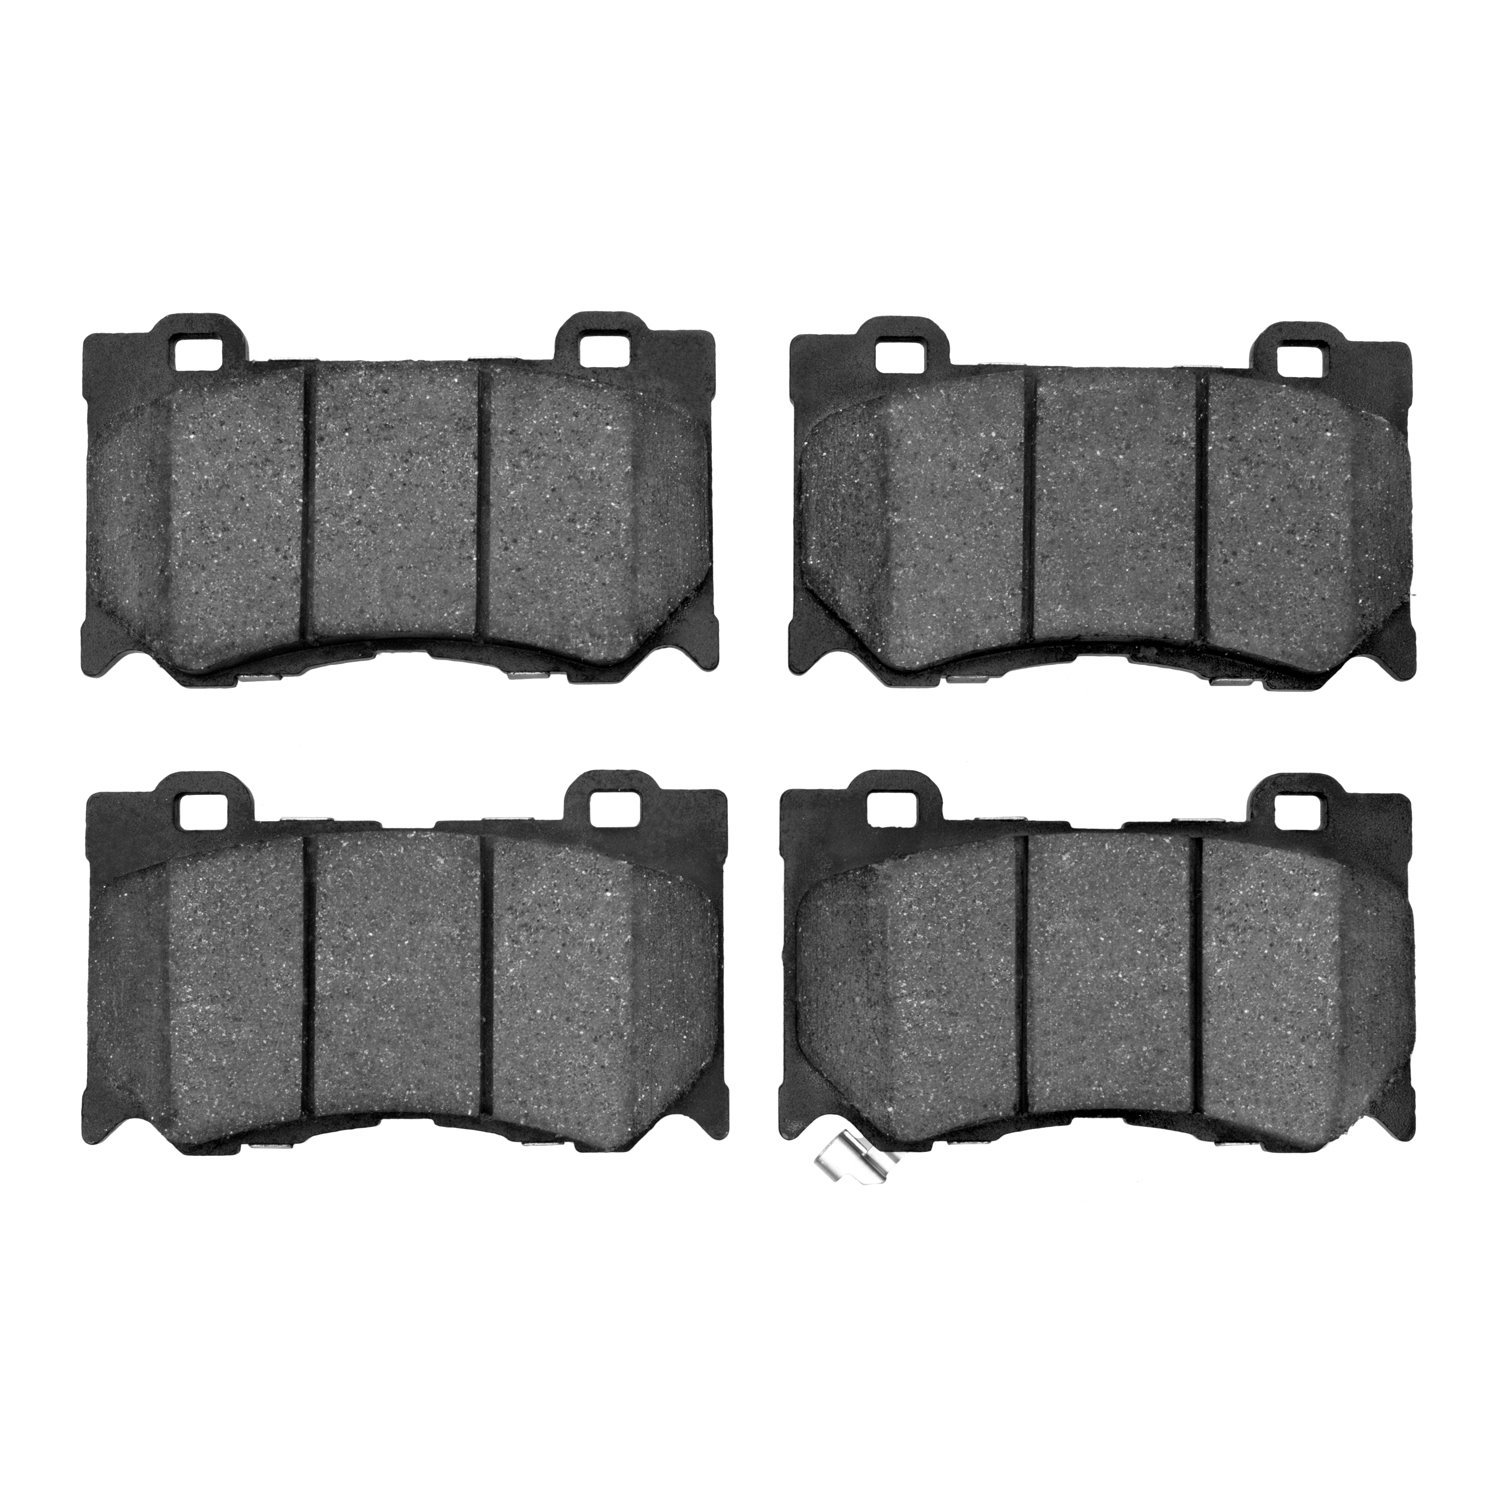 Track/Street Brake Pads, Fits Select Infiniti/Nissan, Position: Front